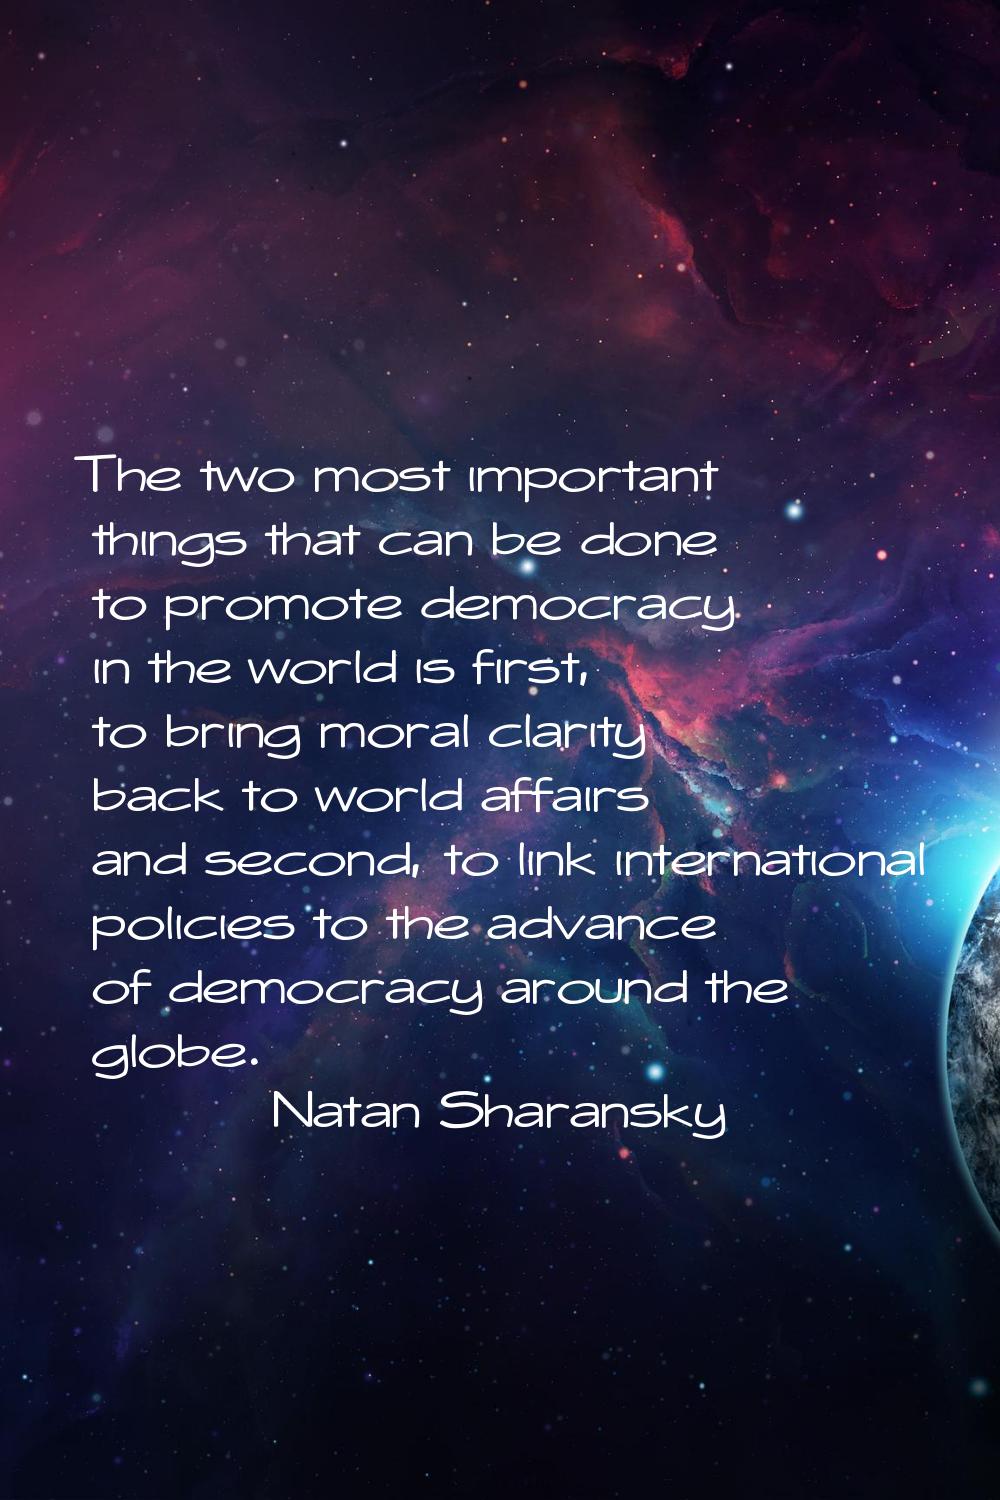 The two most important things that can be done to promote democracy in the world is first, to bring